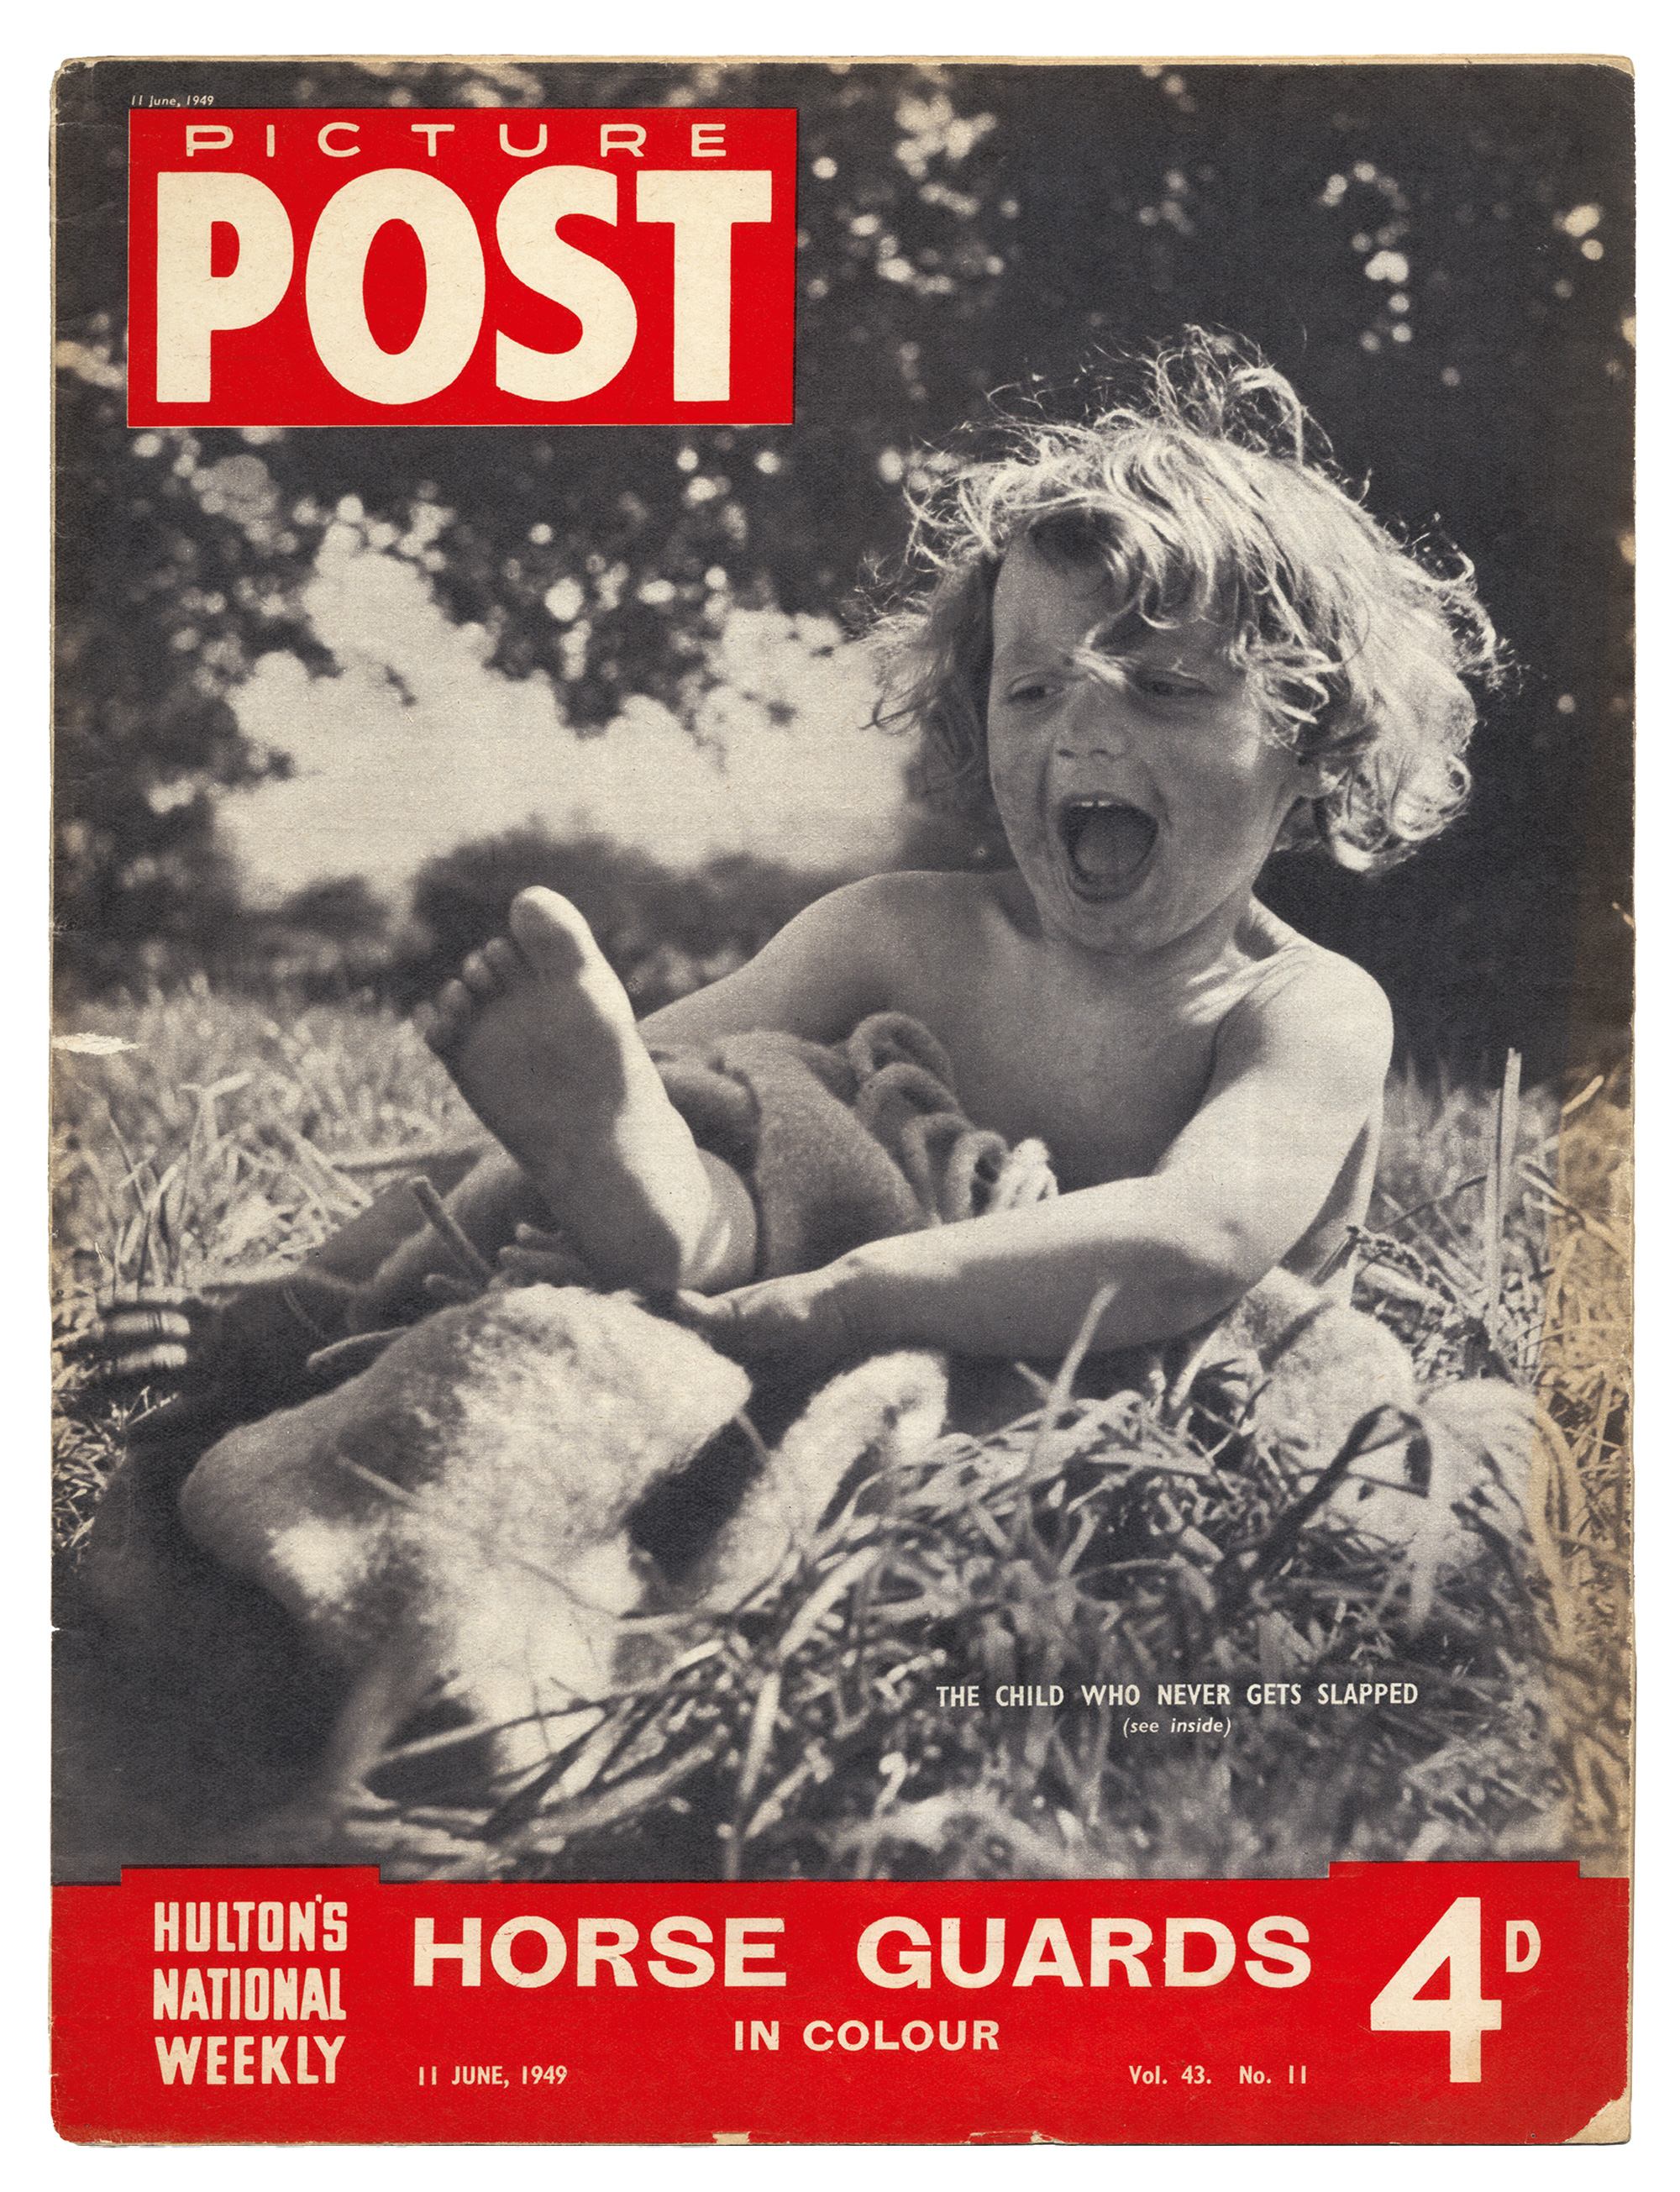 Cover of Picture Post of 11 June 1949, which carried an article titled “Zoe Neill: The Child Who Never Gets Slapped,” by Susan Hicklin. Zoë Neill, now Zoë Readhead, is the daughter of the founder of Summerhill and is currently its headmistress.